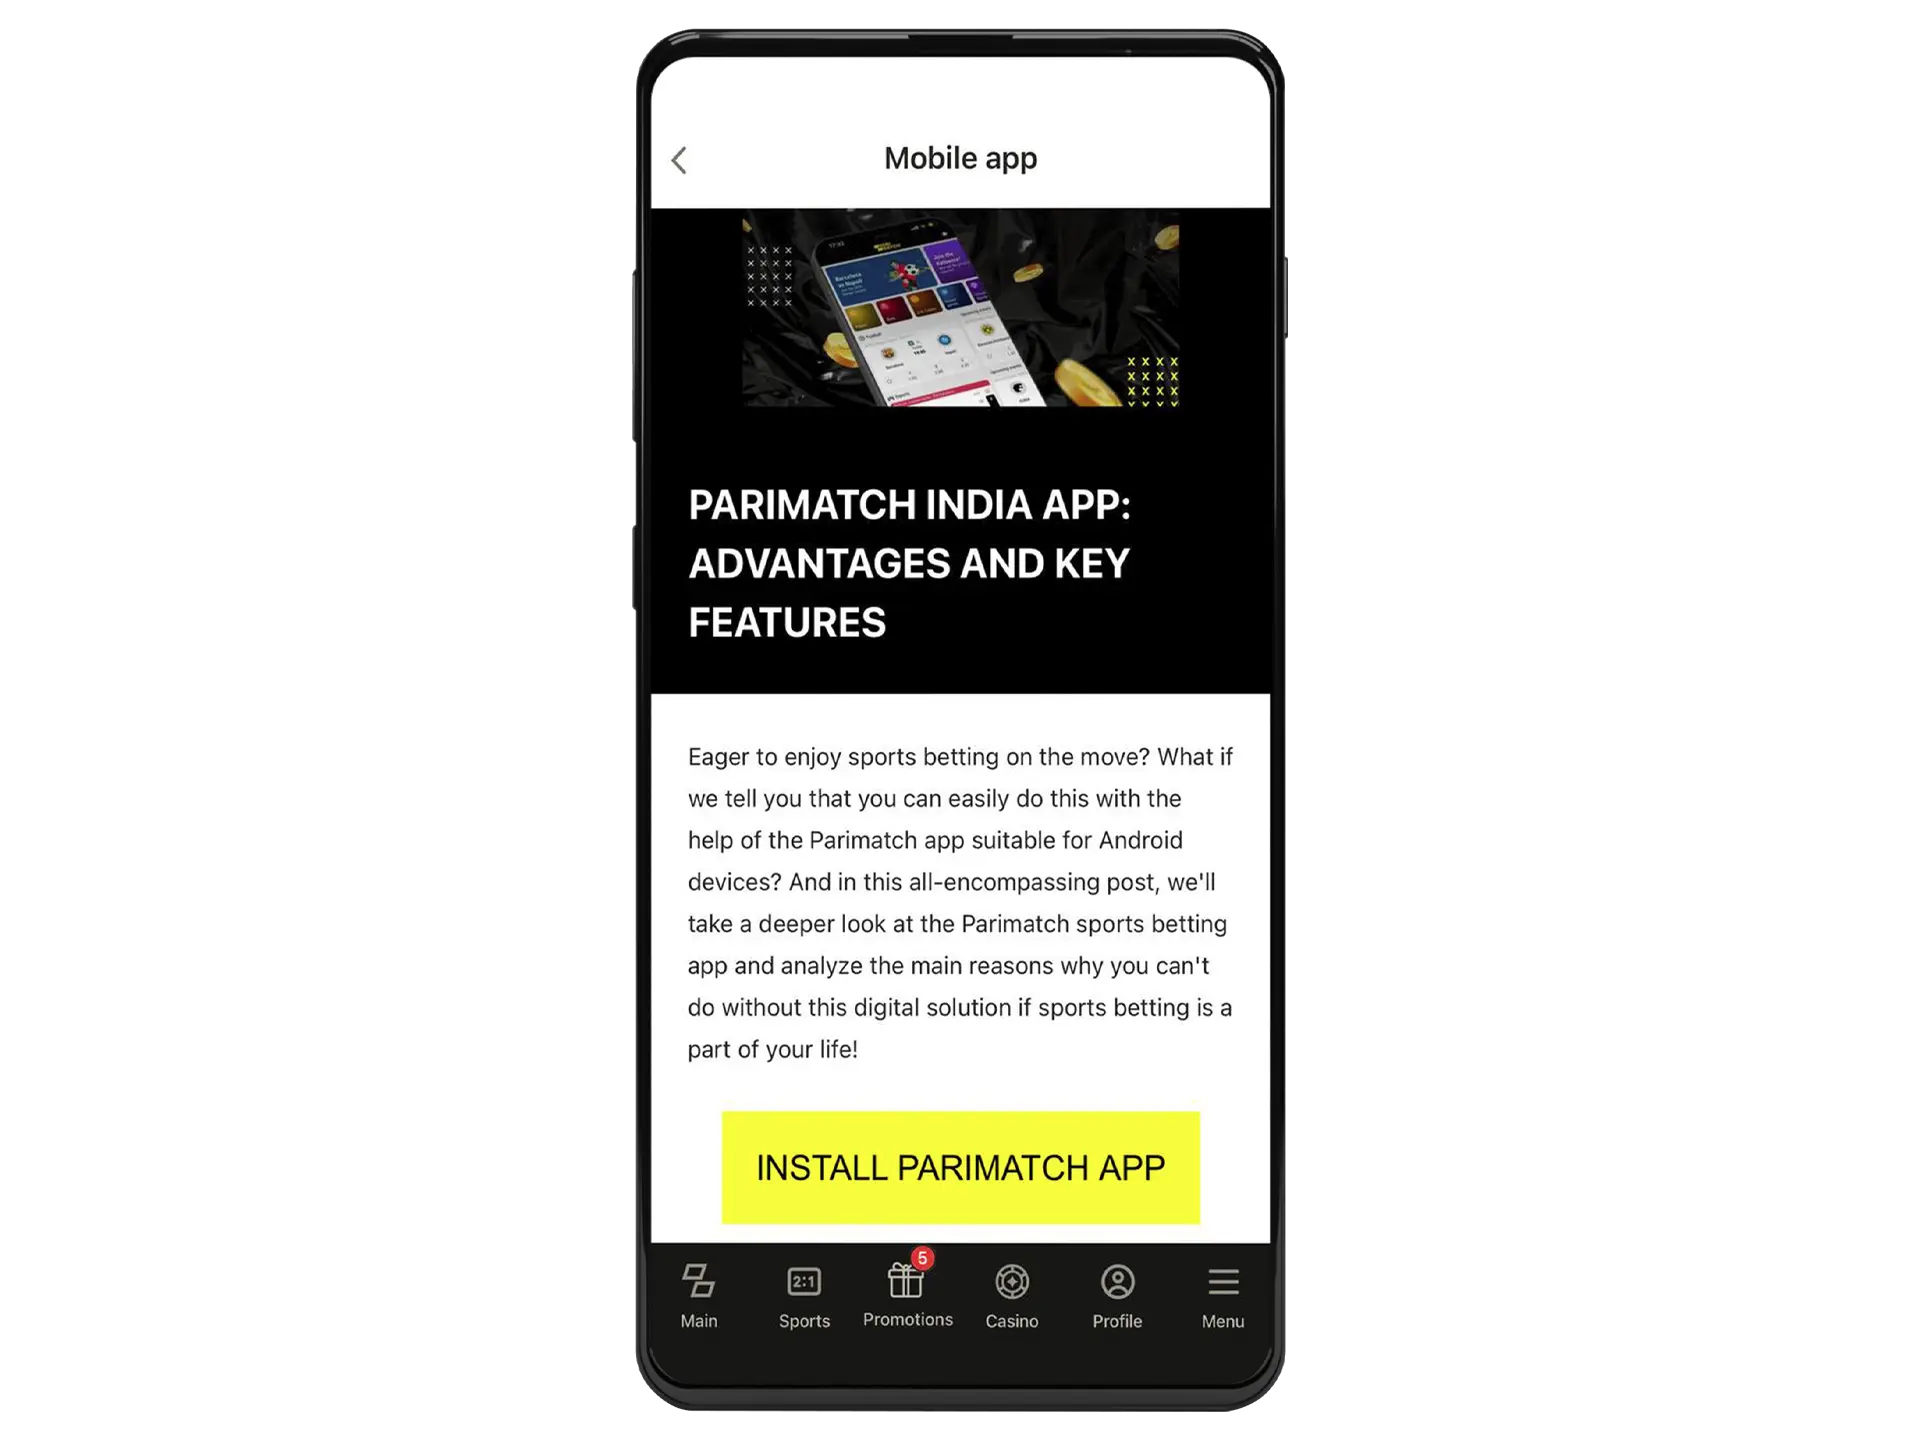 Download the Parimatch android file for India.